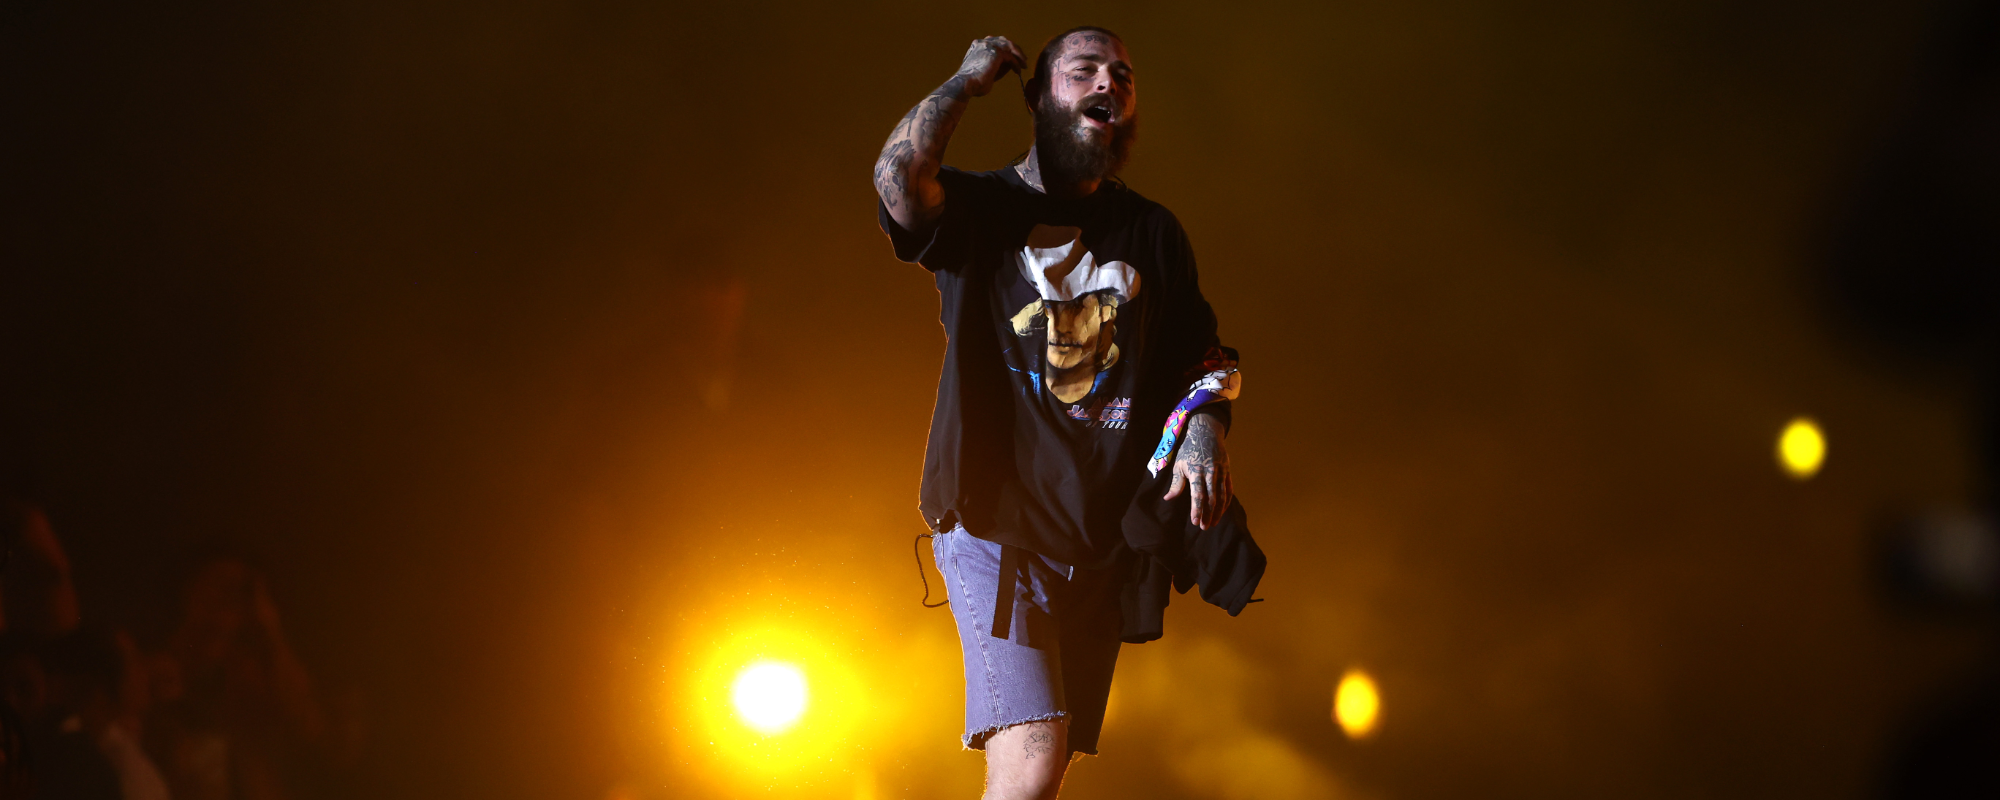 Post Malone Goes Viral for His Unique Outfit on ‘New Year’s Rockin Eve’